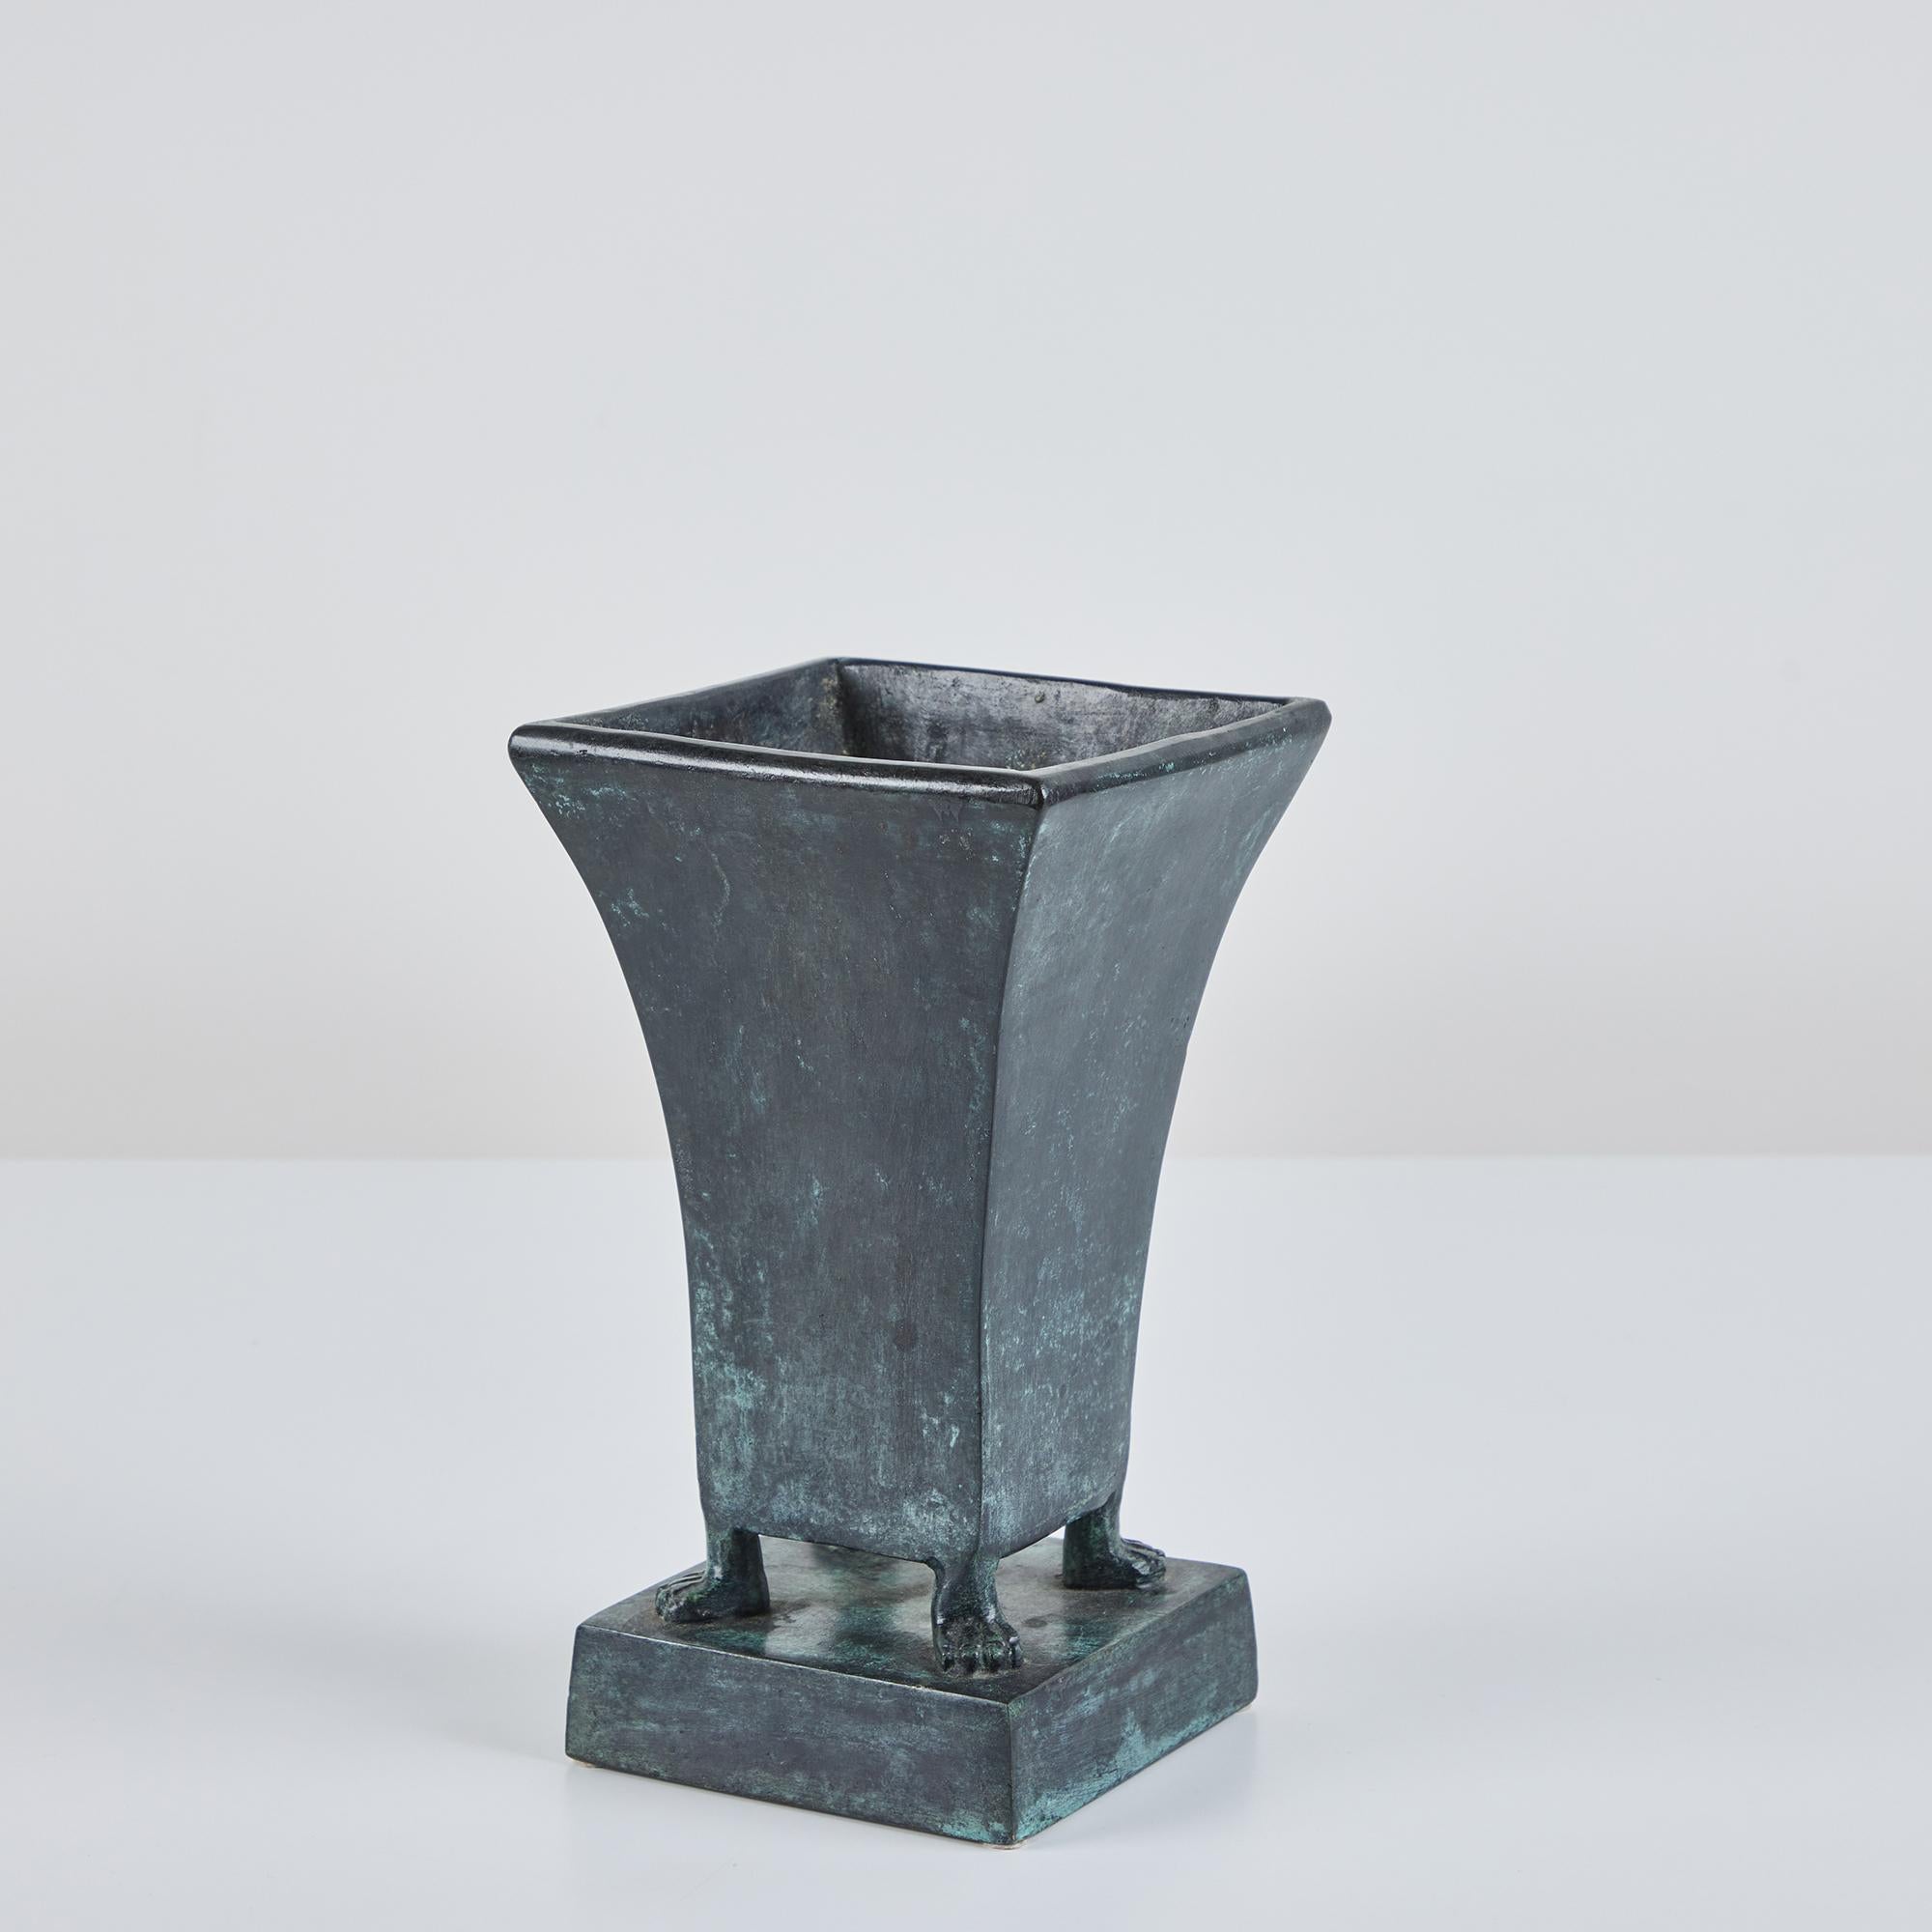 Patinated Art Deco bronze tulip vessel by Maitland-Smith. The vase features a square opening that tapers towards the bottom. The bottom of the vase is supported by four feet on a bronze pedestal. Retains the original label.

Dimensions
5.5